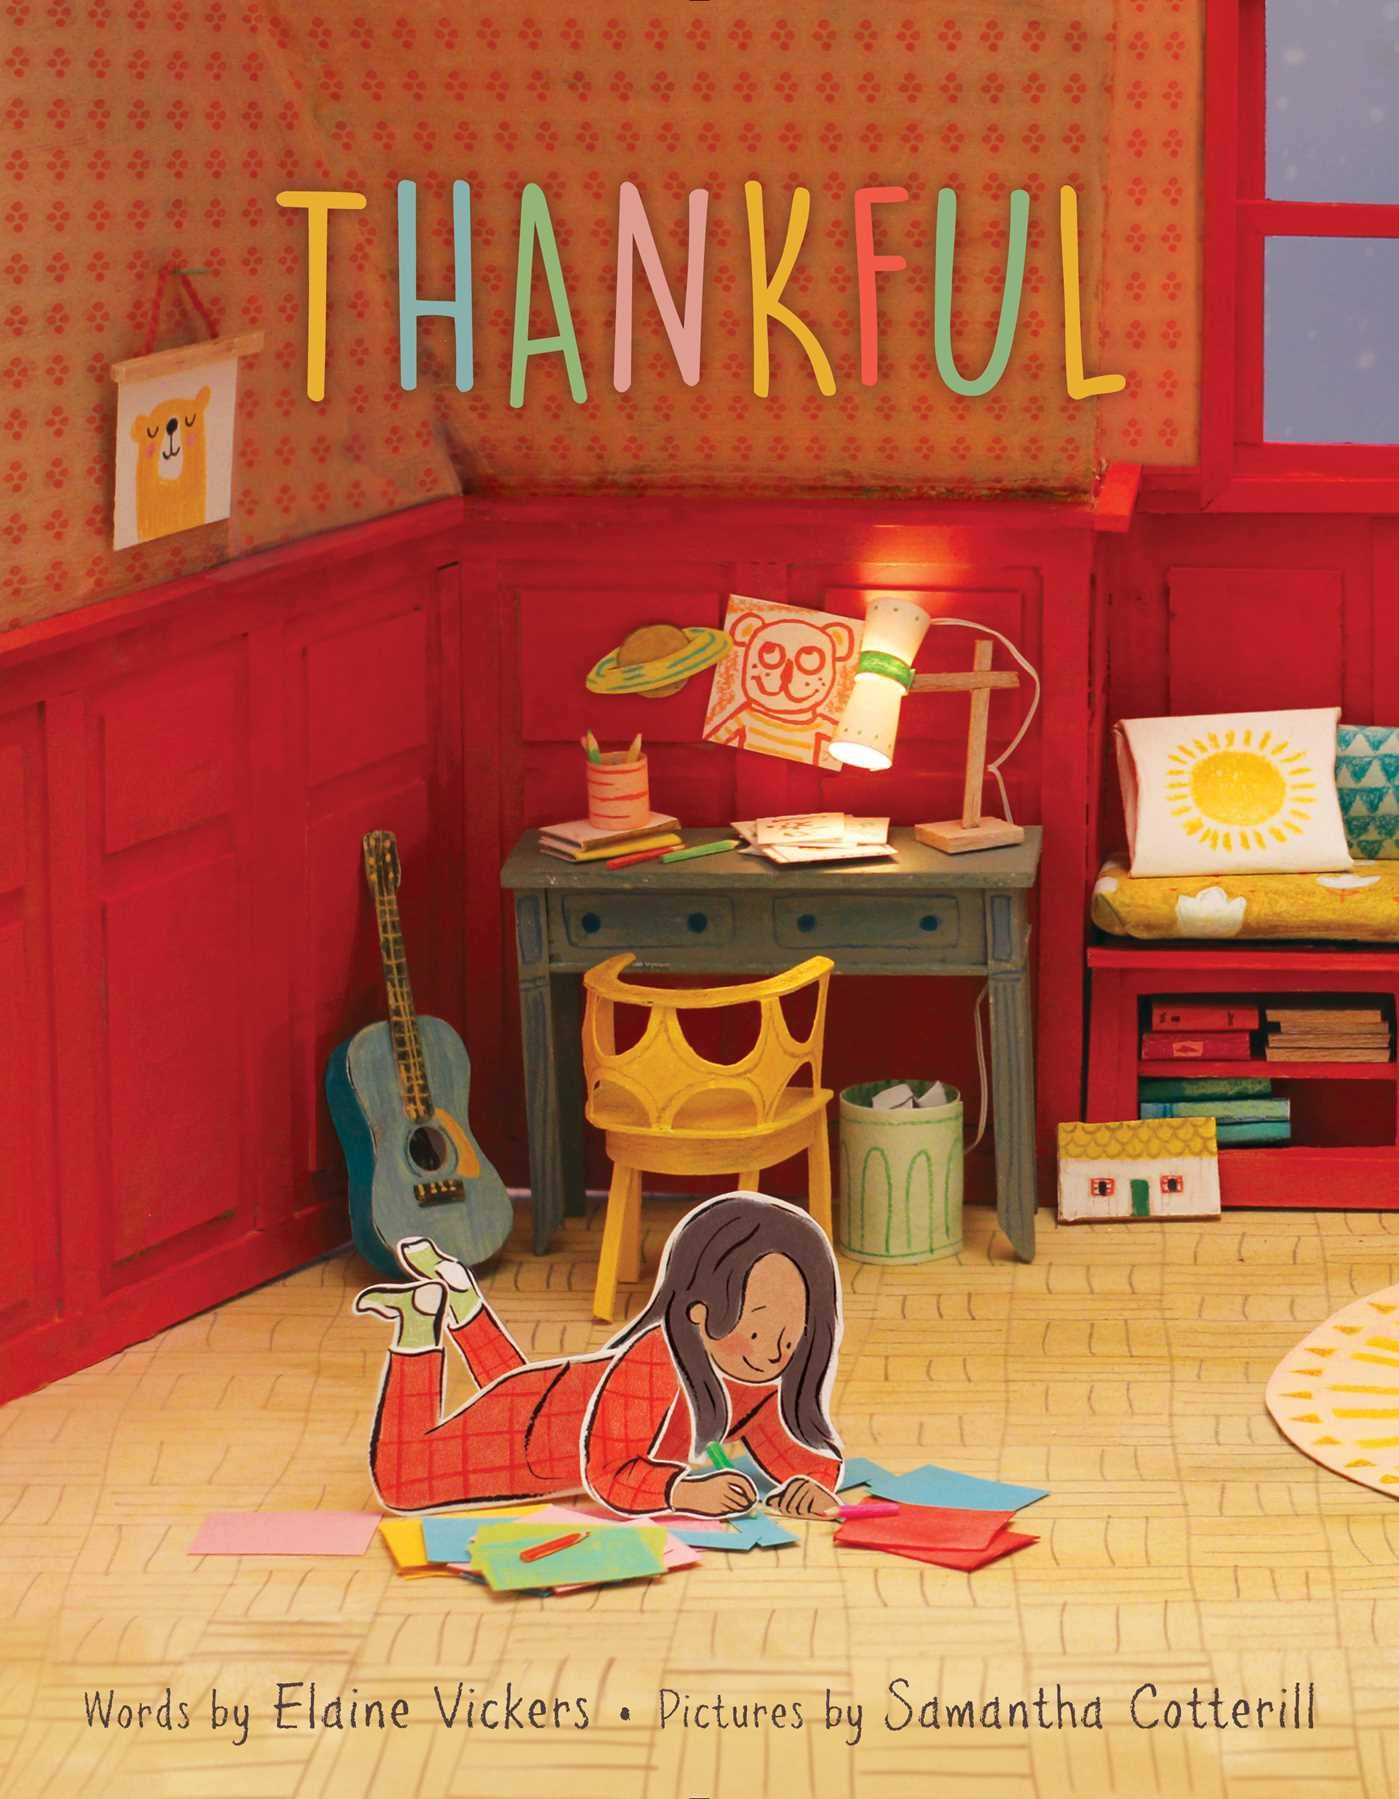 speech and language teaching concepts for Thankful in speech therapy